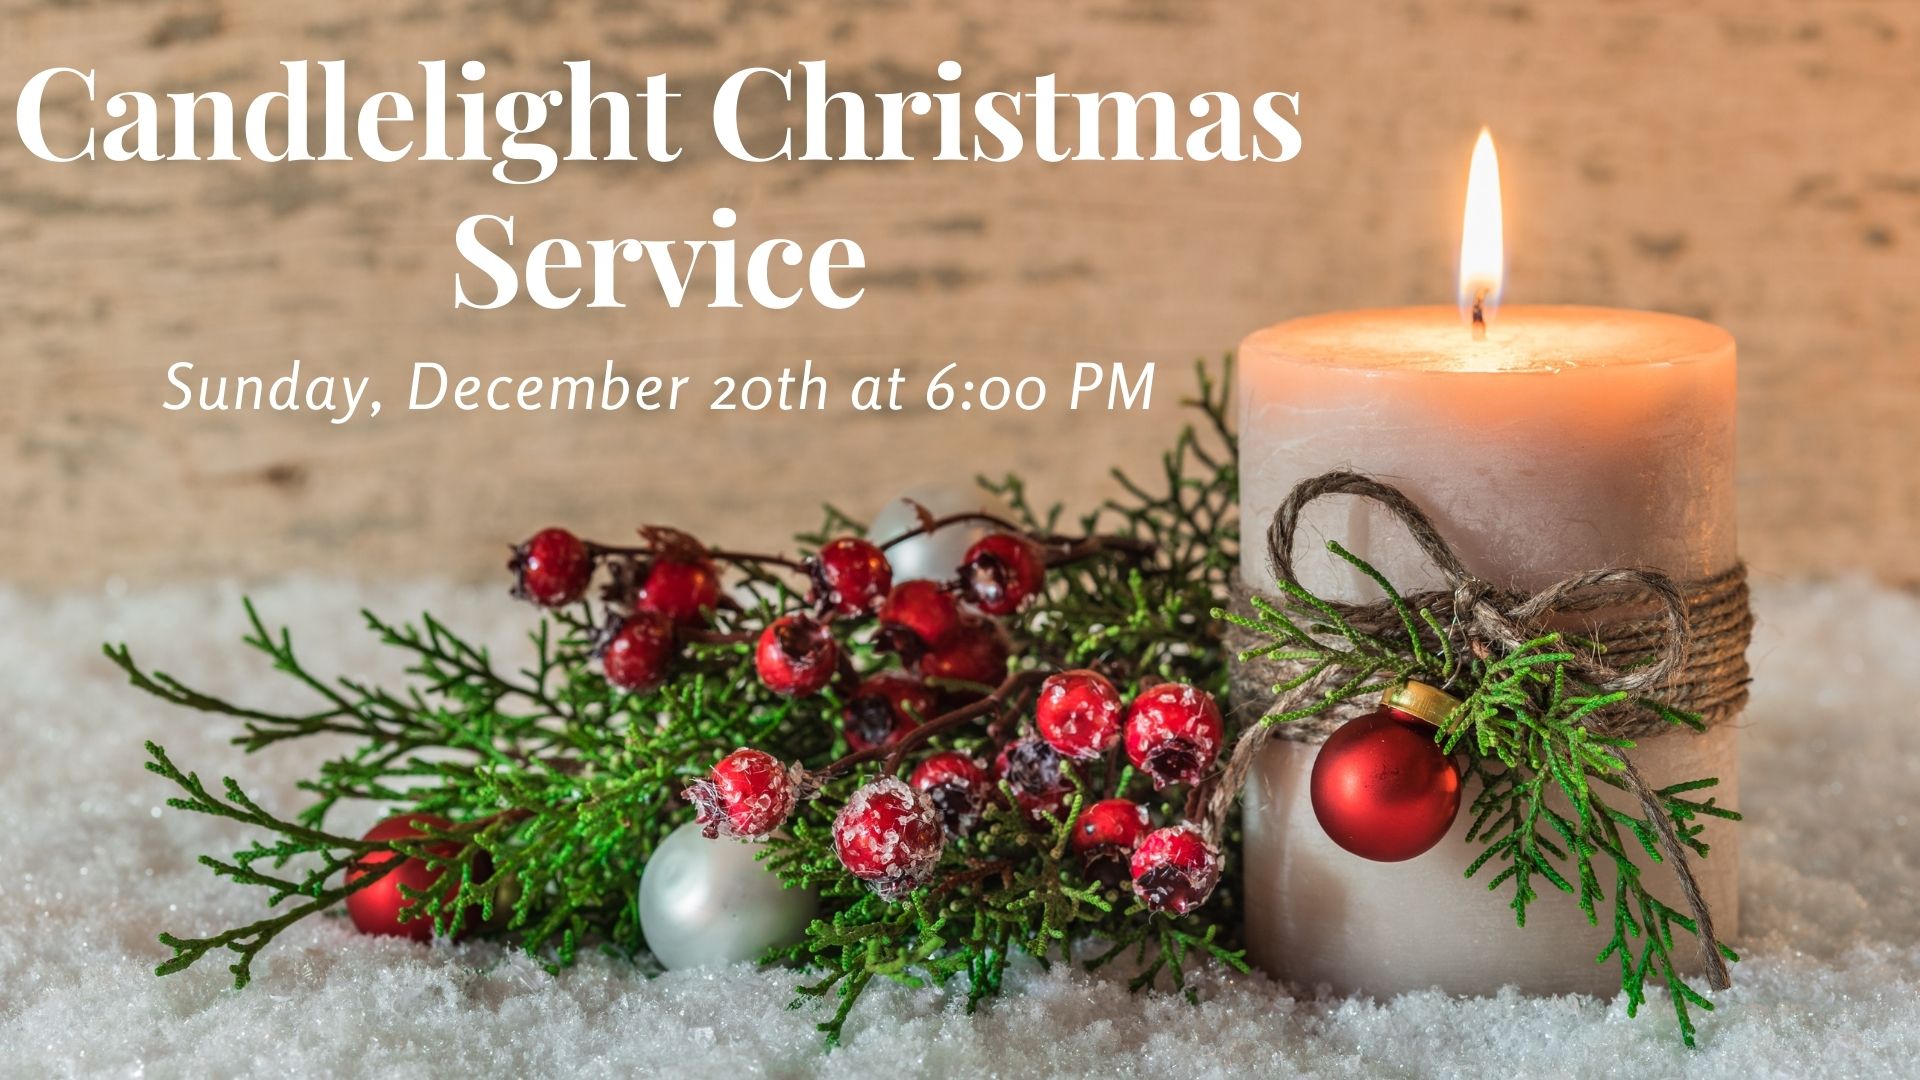 Candlight Service December 20th at 6PM